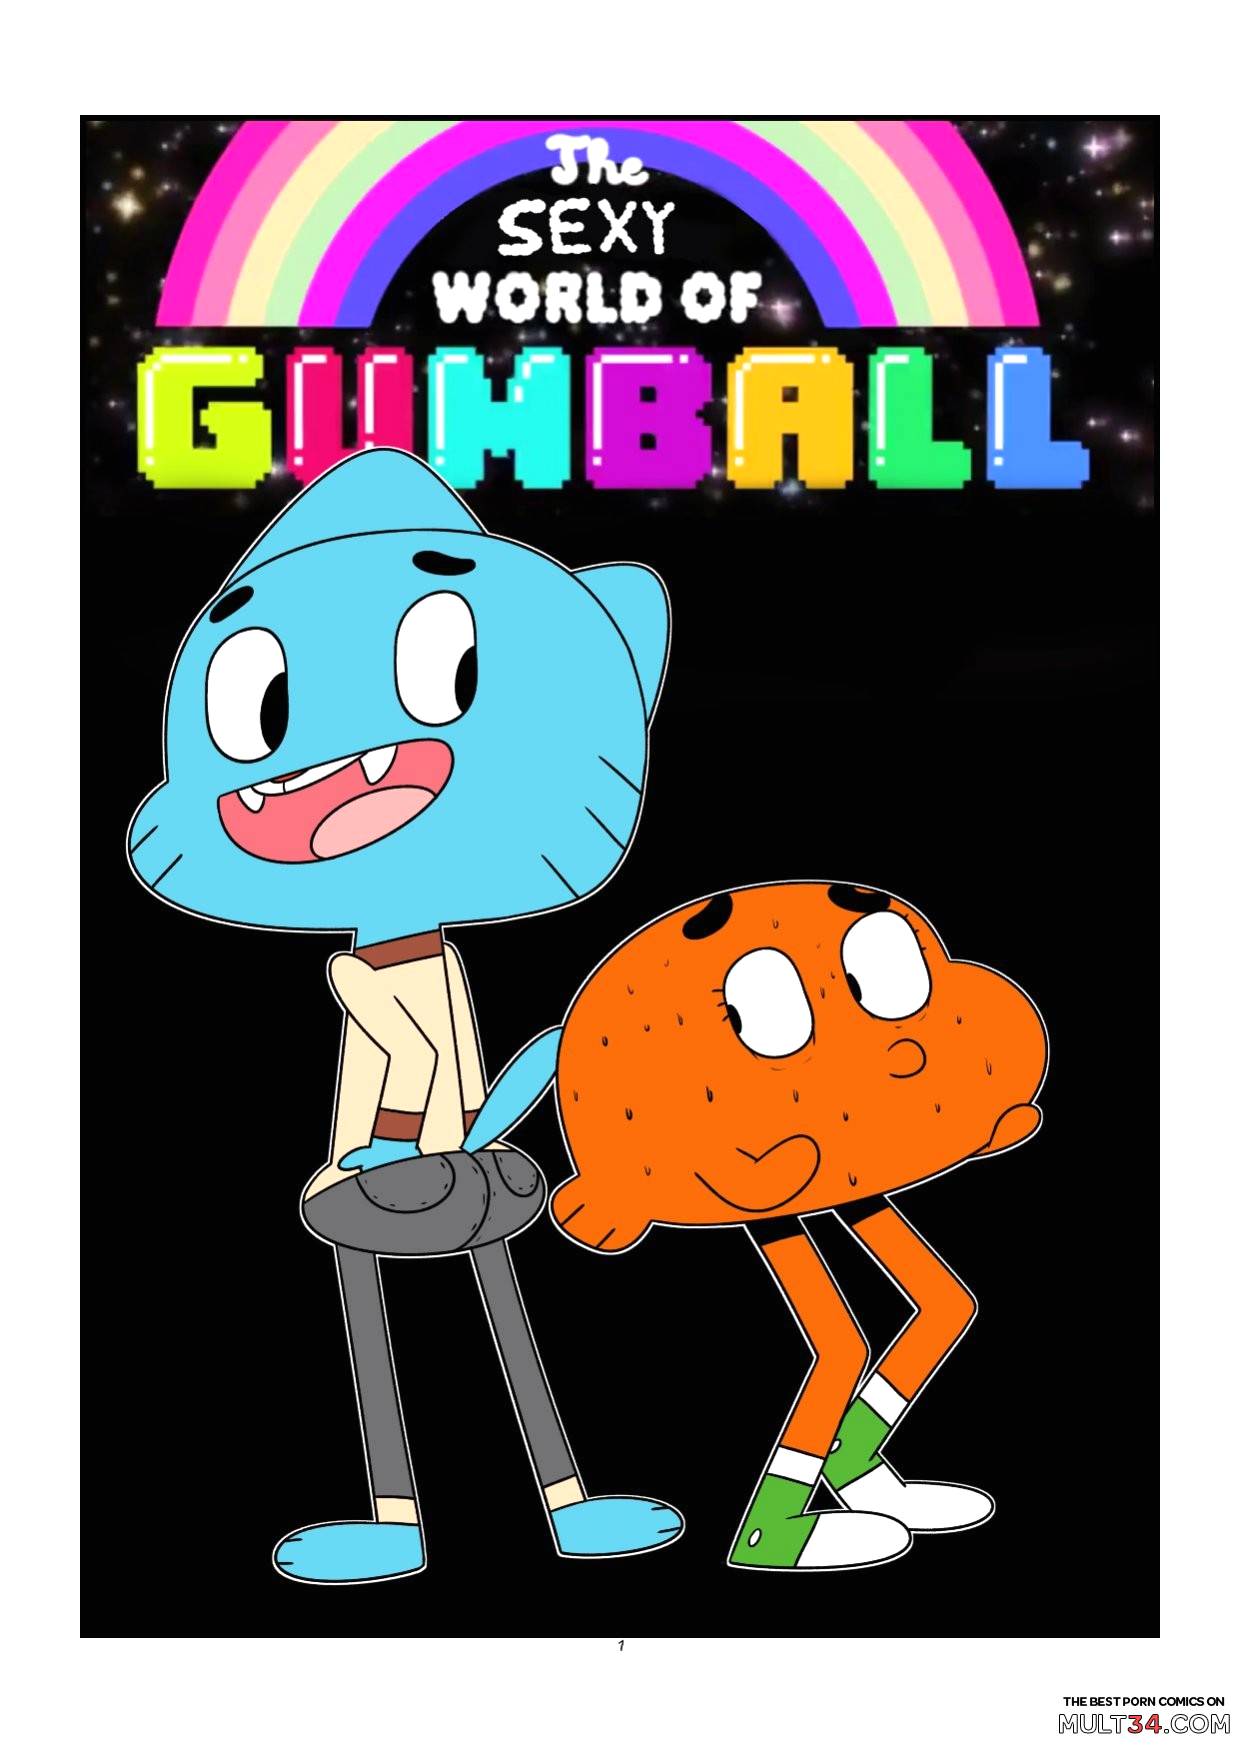 Gumball Naked Xxx Cartoon - The Sexy World Of Gumball gay porn comic - the best cartoon porn comics,  Rule 34 | MULT34